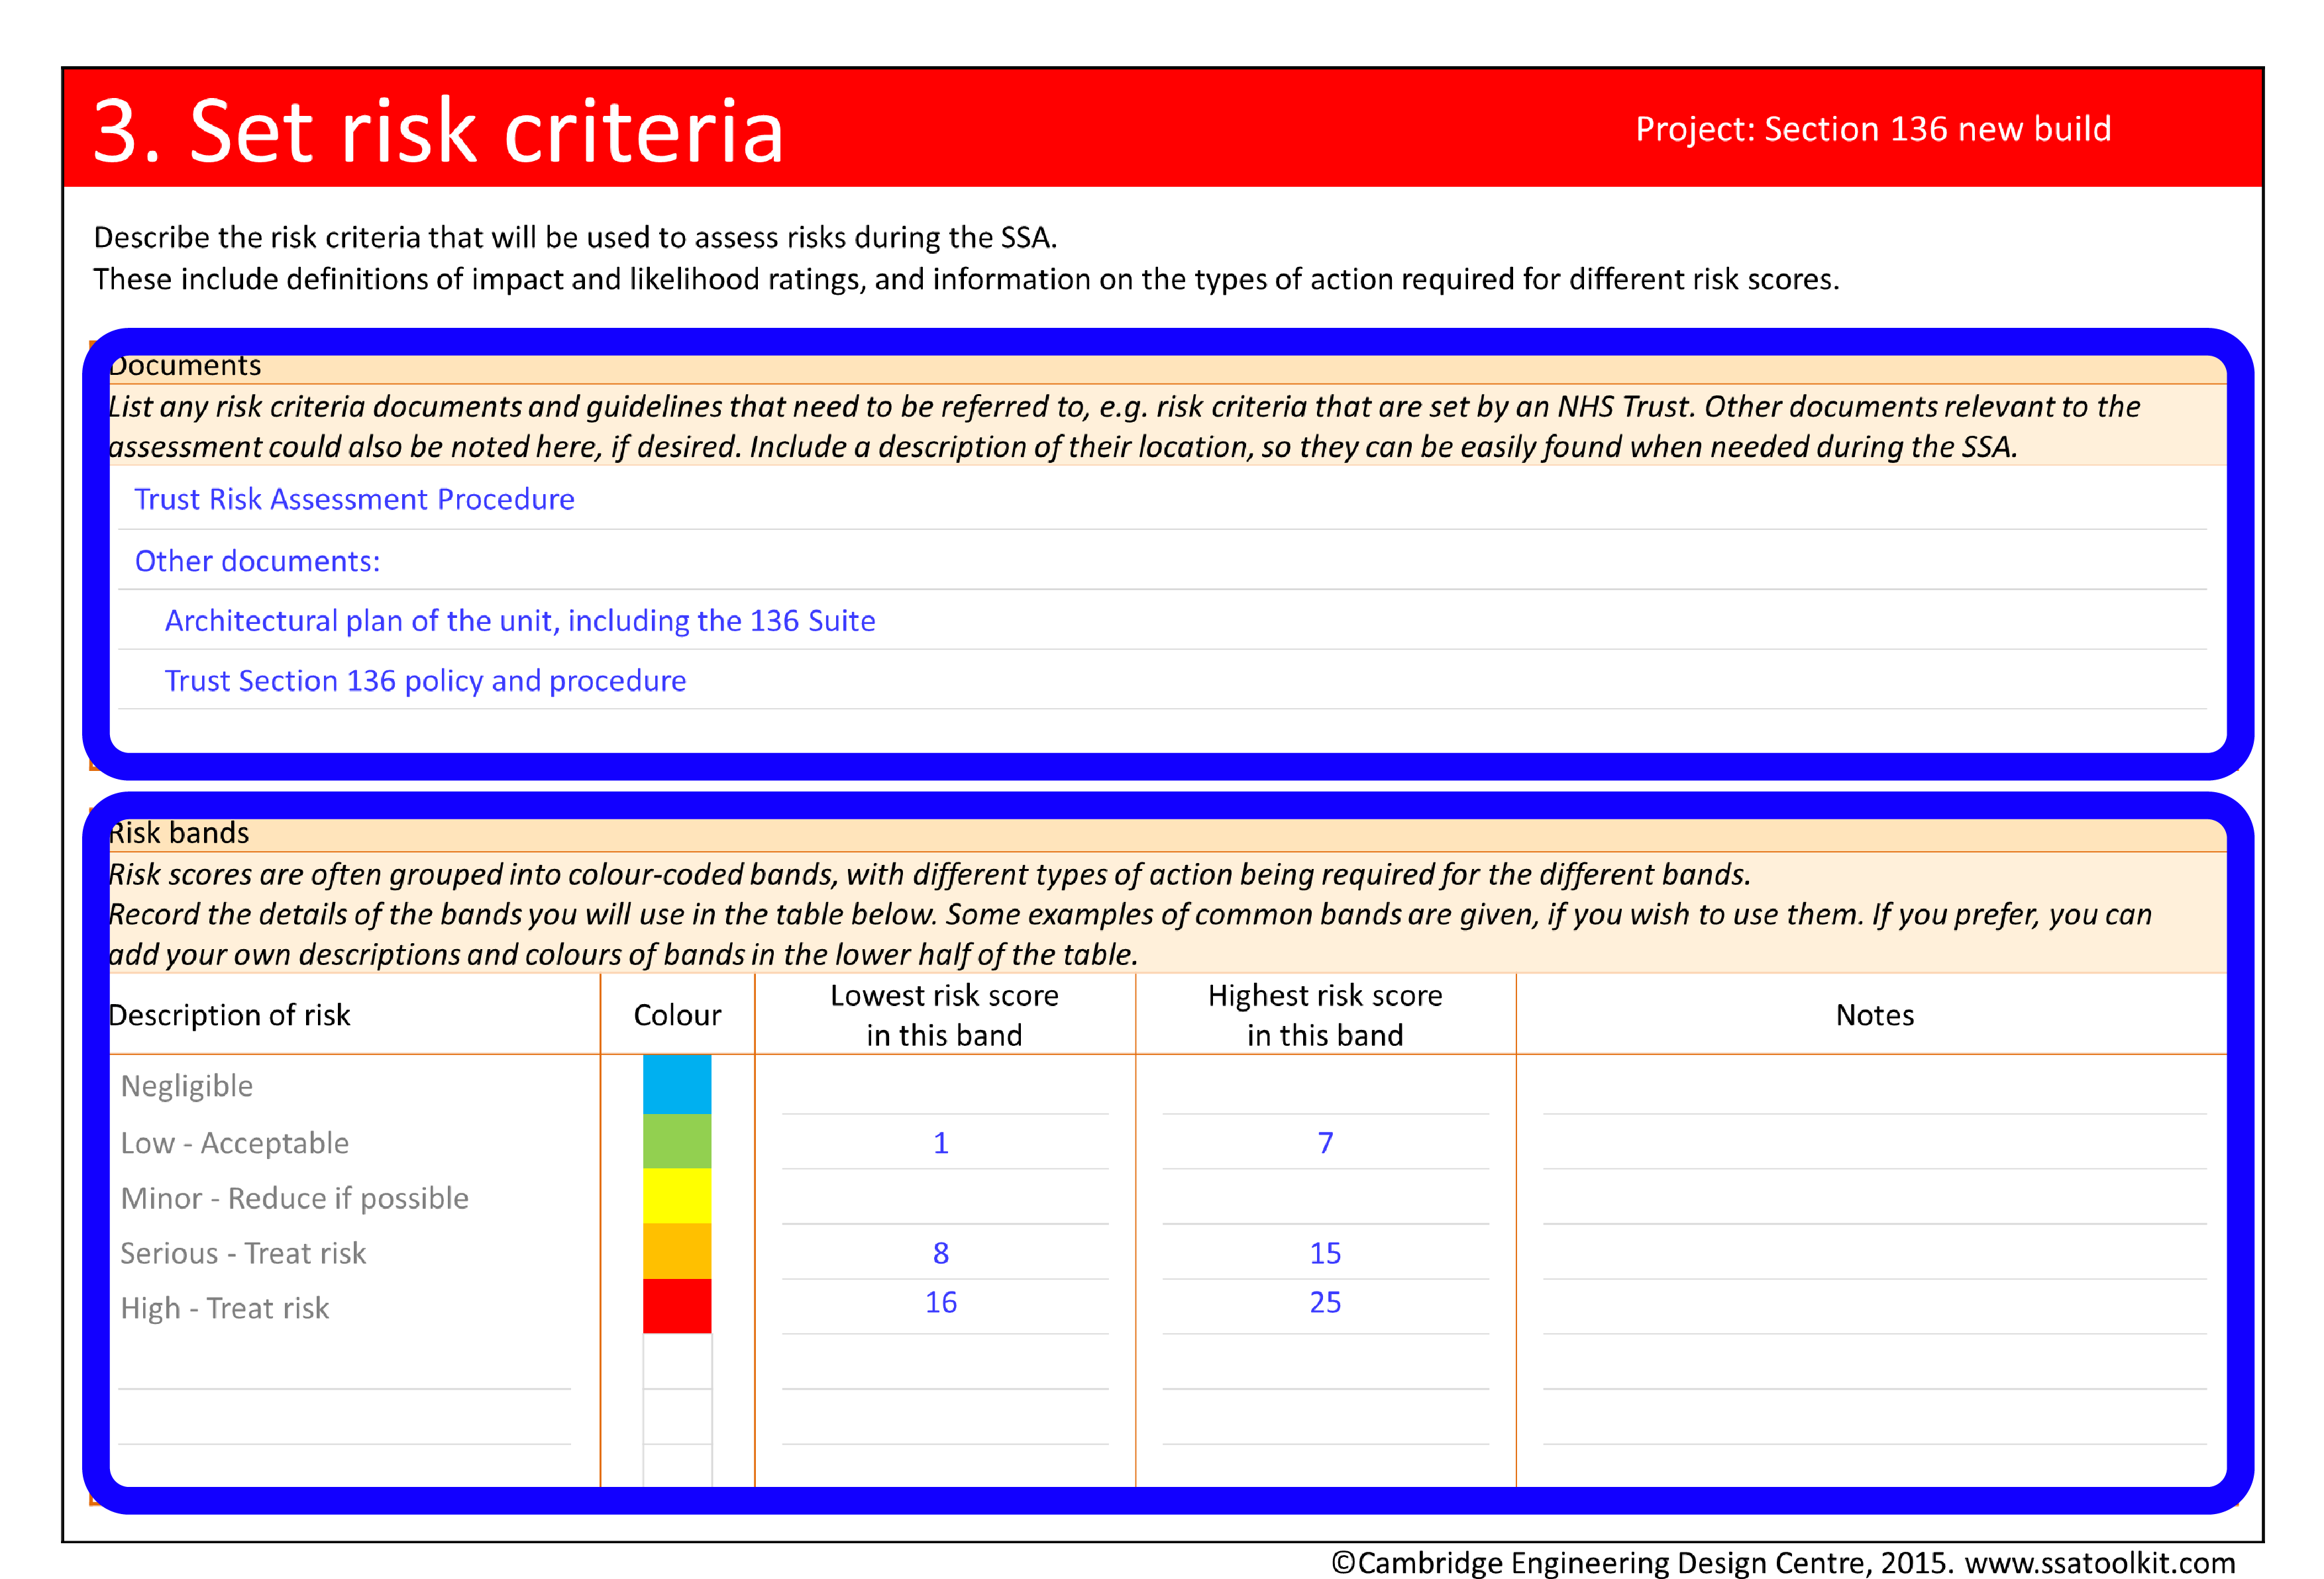 Screenshot of the Set risk criteria page from the Section 136 case study. This page lists risk criteria documents: the Trust Risk Assessment Procedure, the architectural plan of the unit, and the Trust Section 136 policy and procedure. It also describes the risk bands used in this SSA: Green (risks scores 1 to 7), Orange (8 to 15) and Red (16 to 25). The full form in pdf is available from the Resources page.